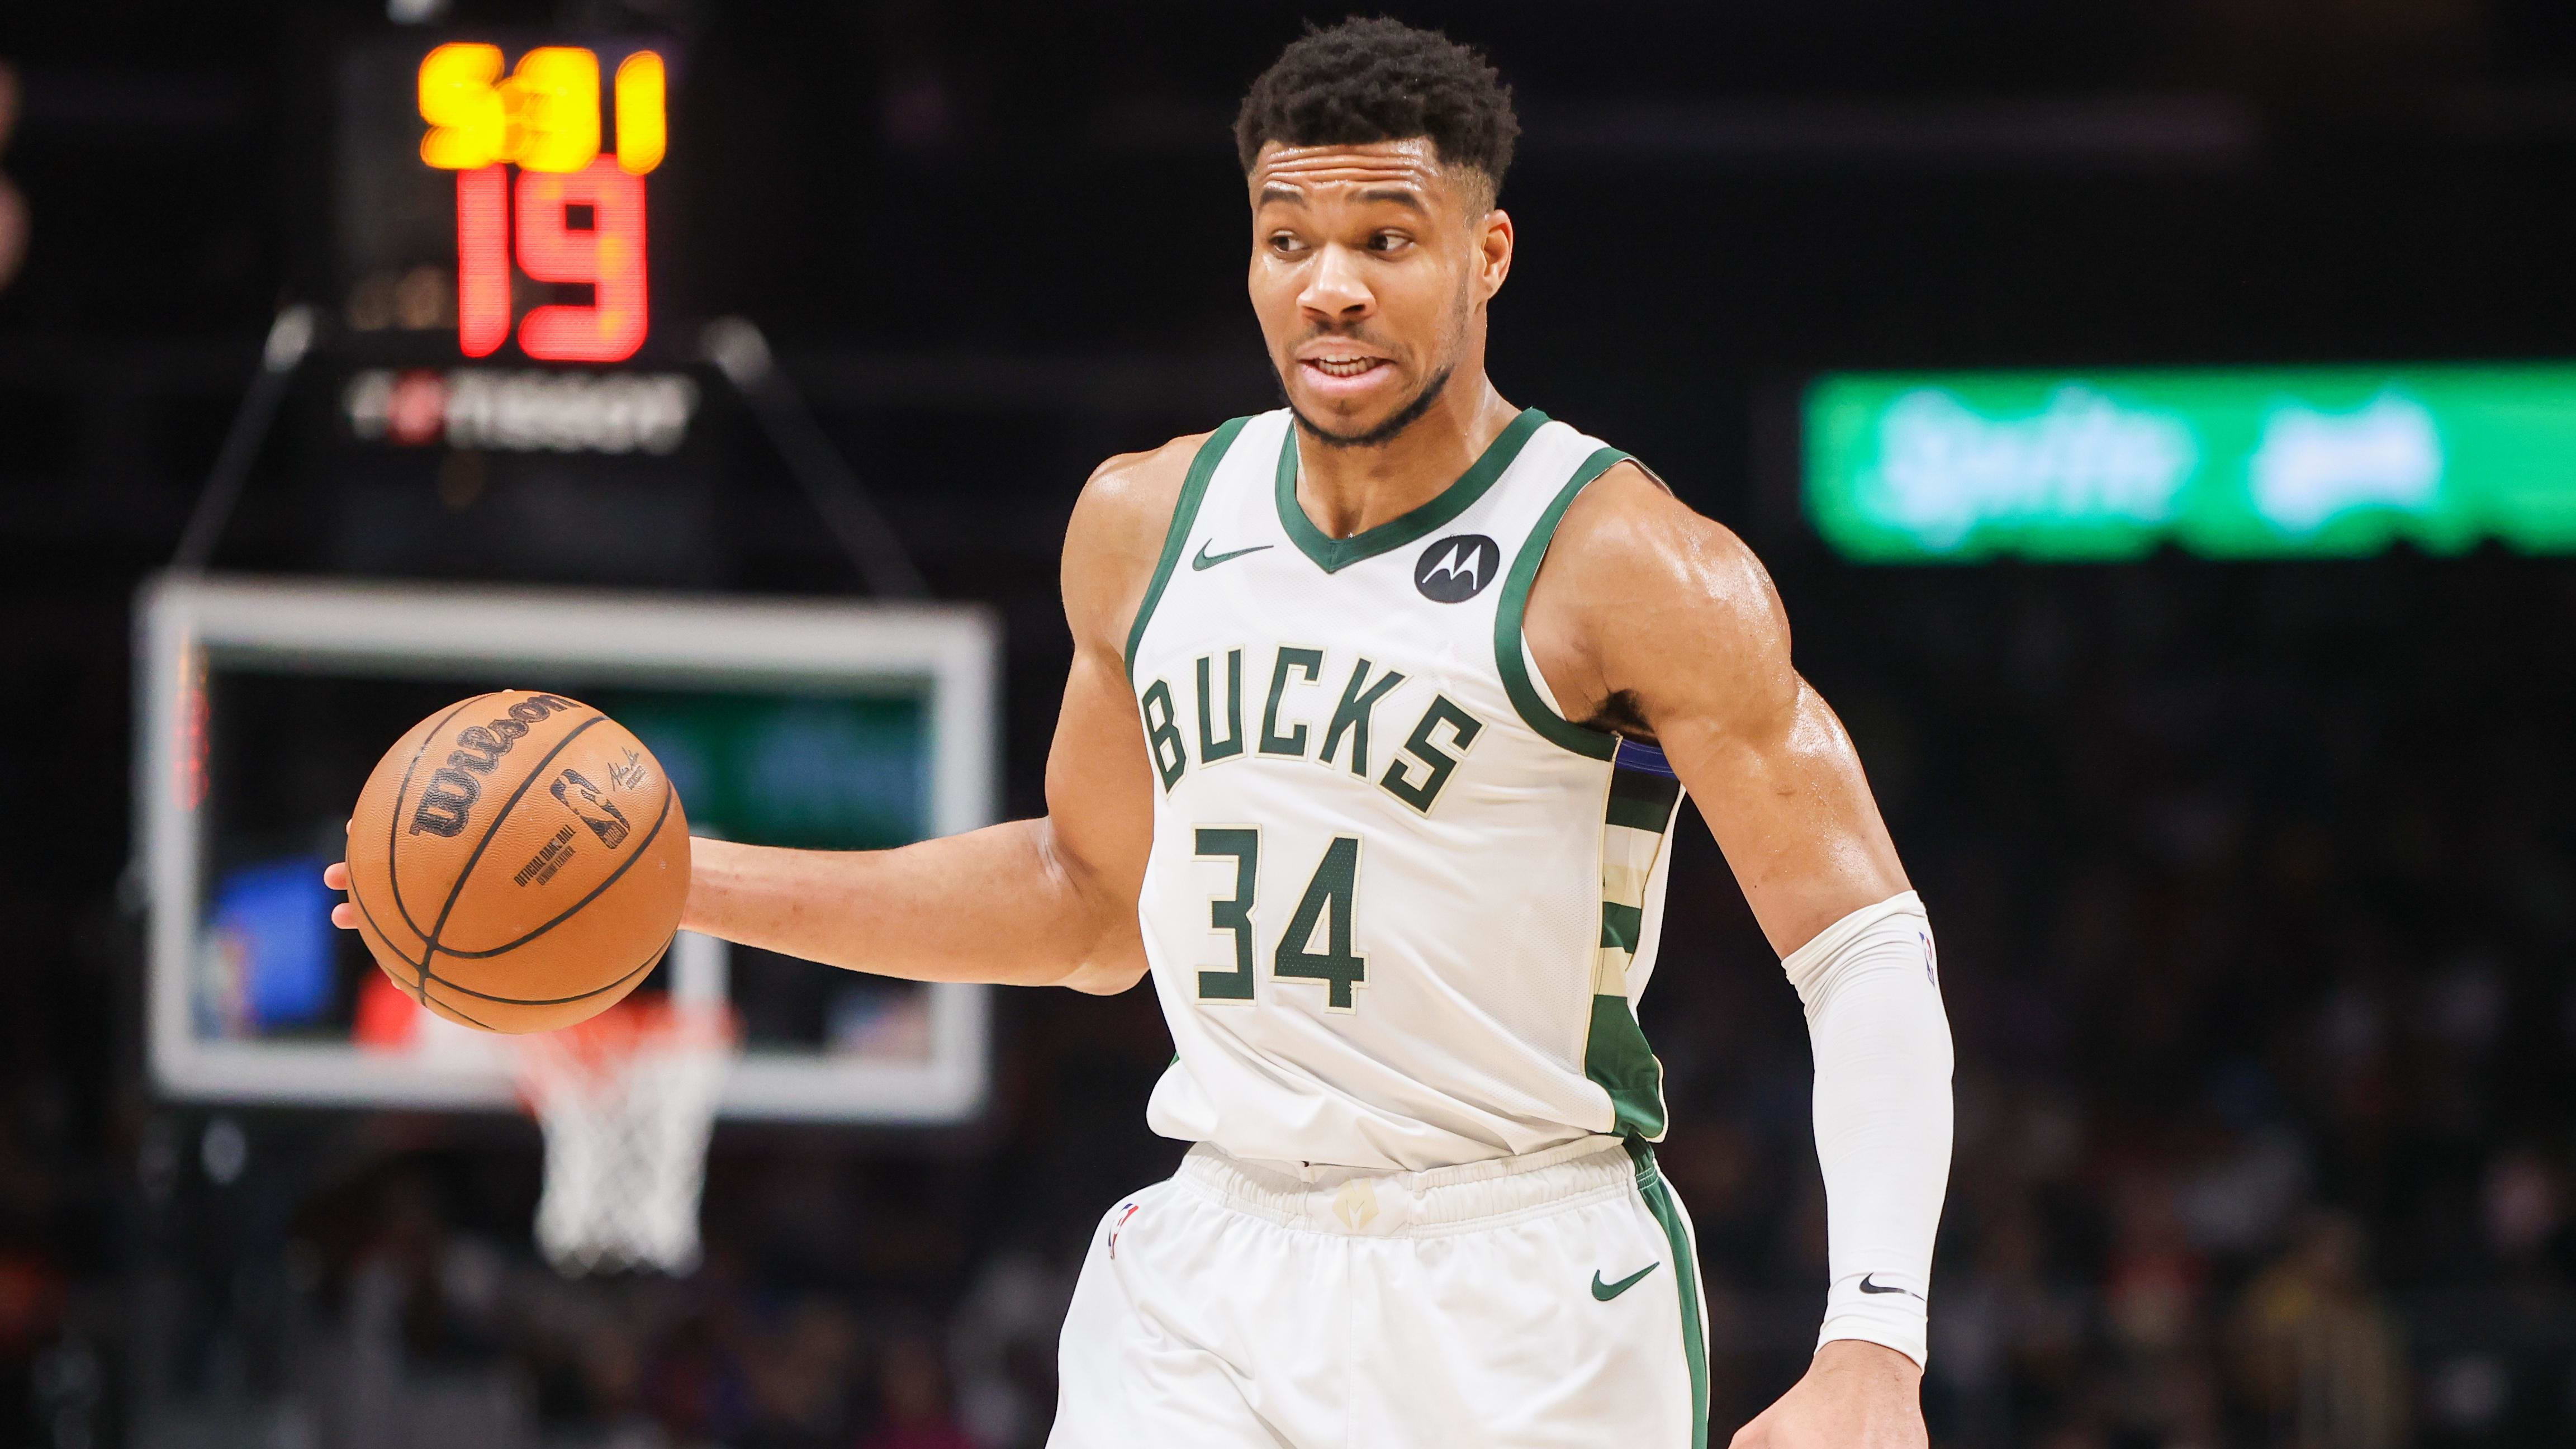 BREAKING: Giannis Antetokounmpo’s Final Status For Bucks-Pacers Game 6